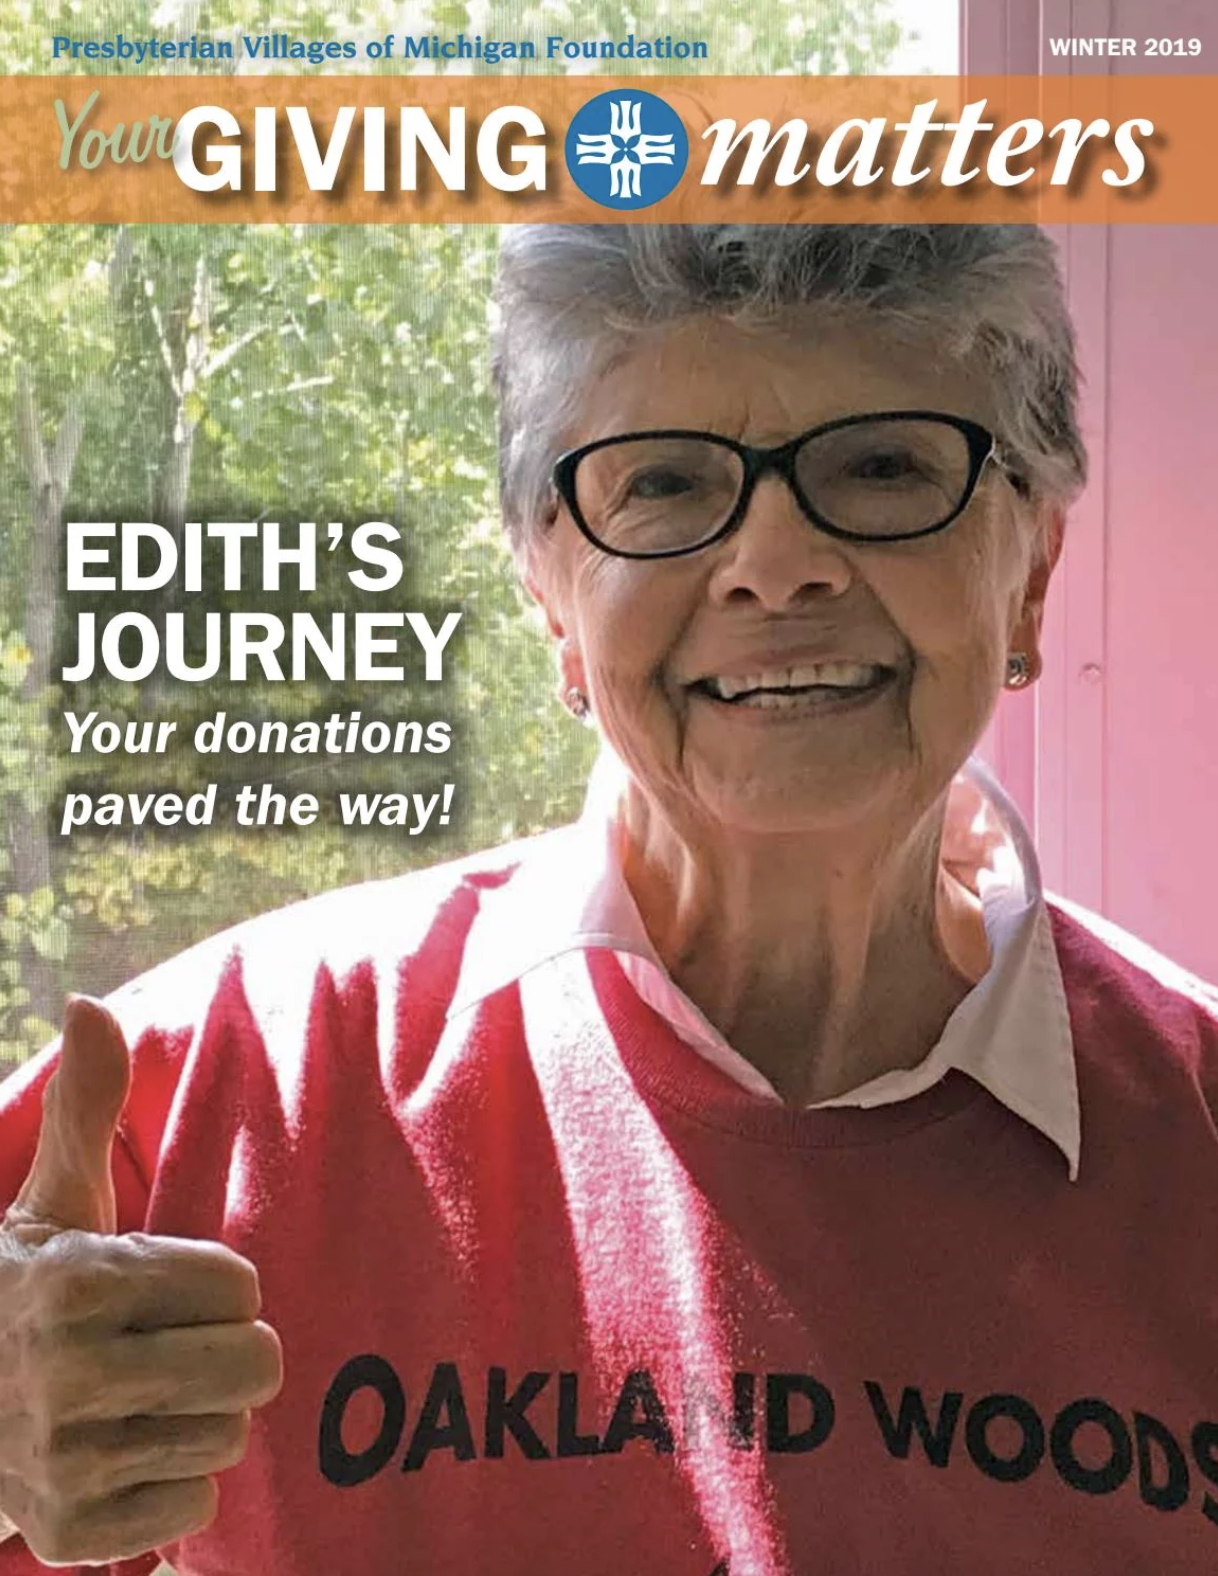 Read the Winter 2019 issue of Your giving Matters and read about Edith's journey to the Village of Oakland Woods!